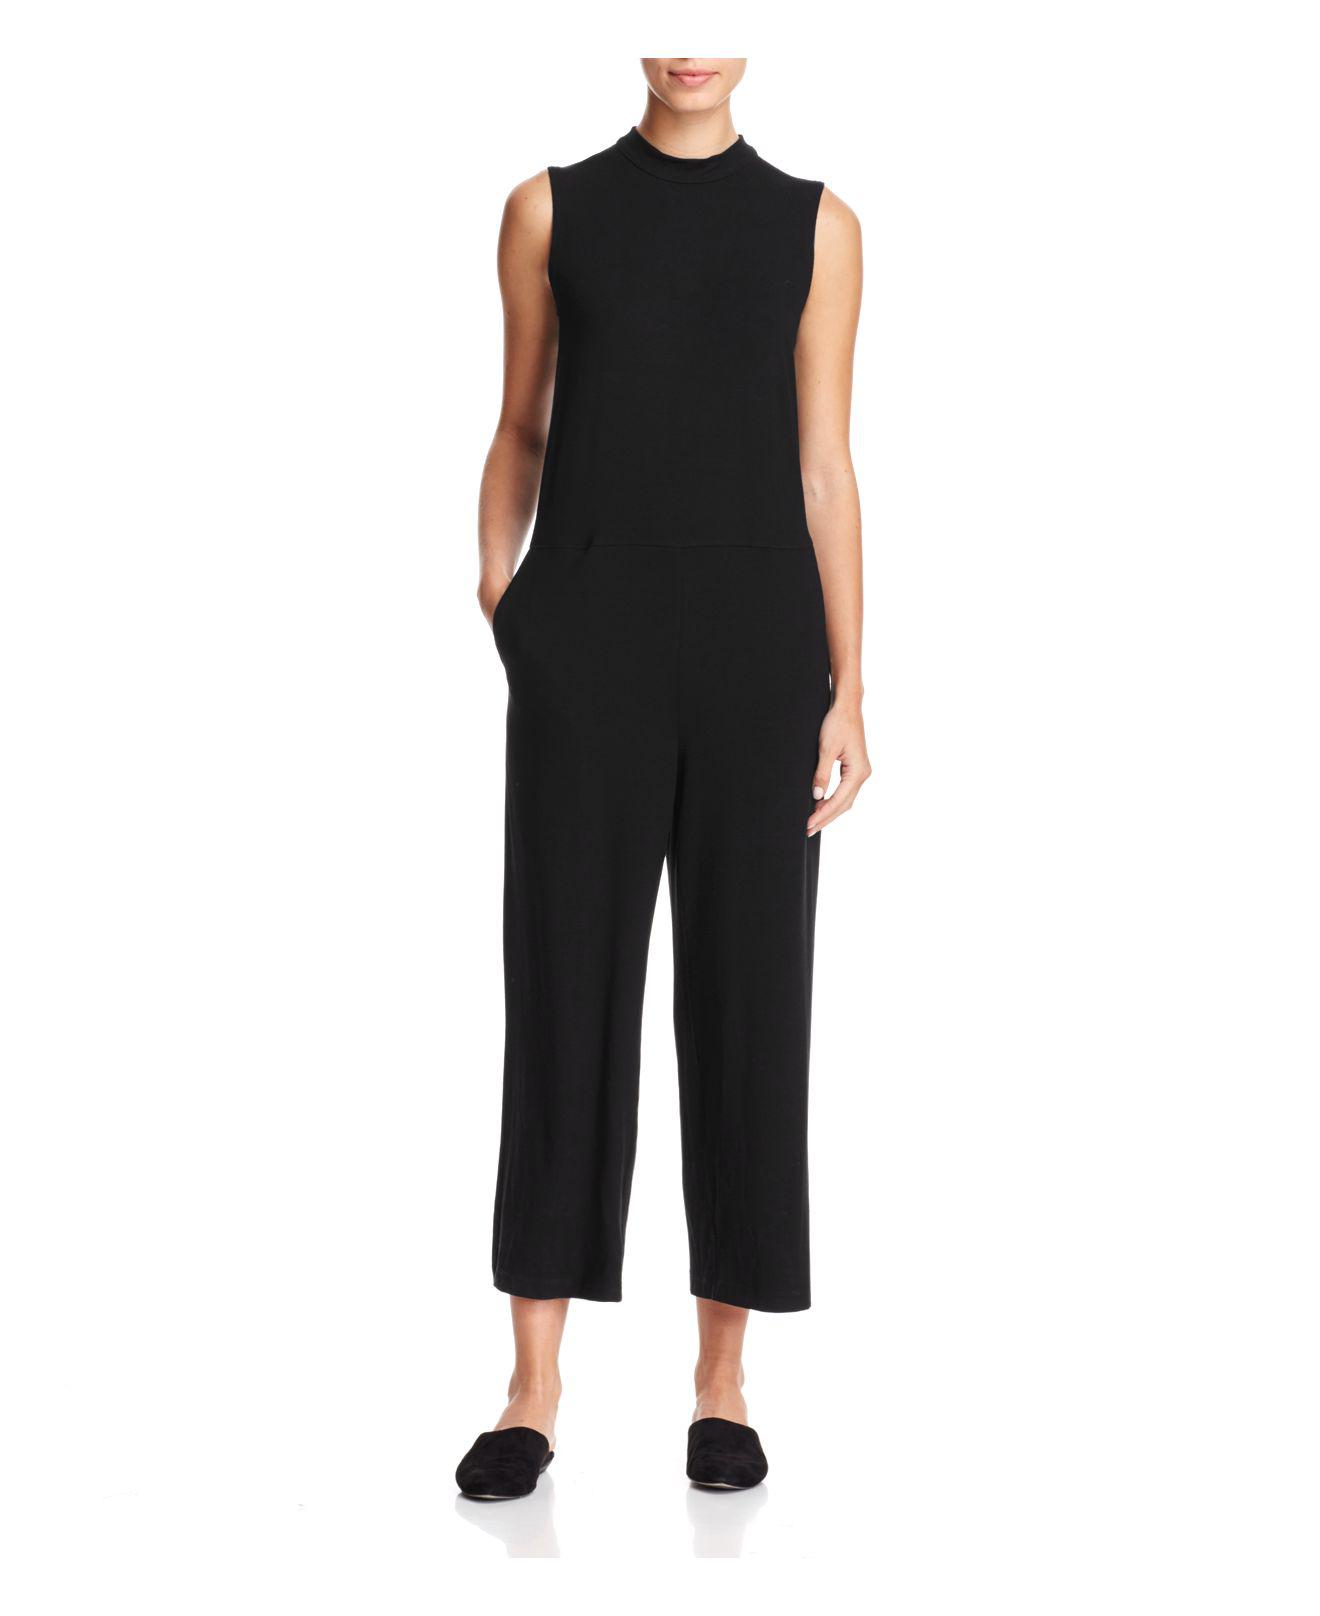 Lyst Eileen Fisher Sleeveless Cropped Jumpsuit in Black